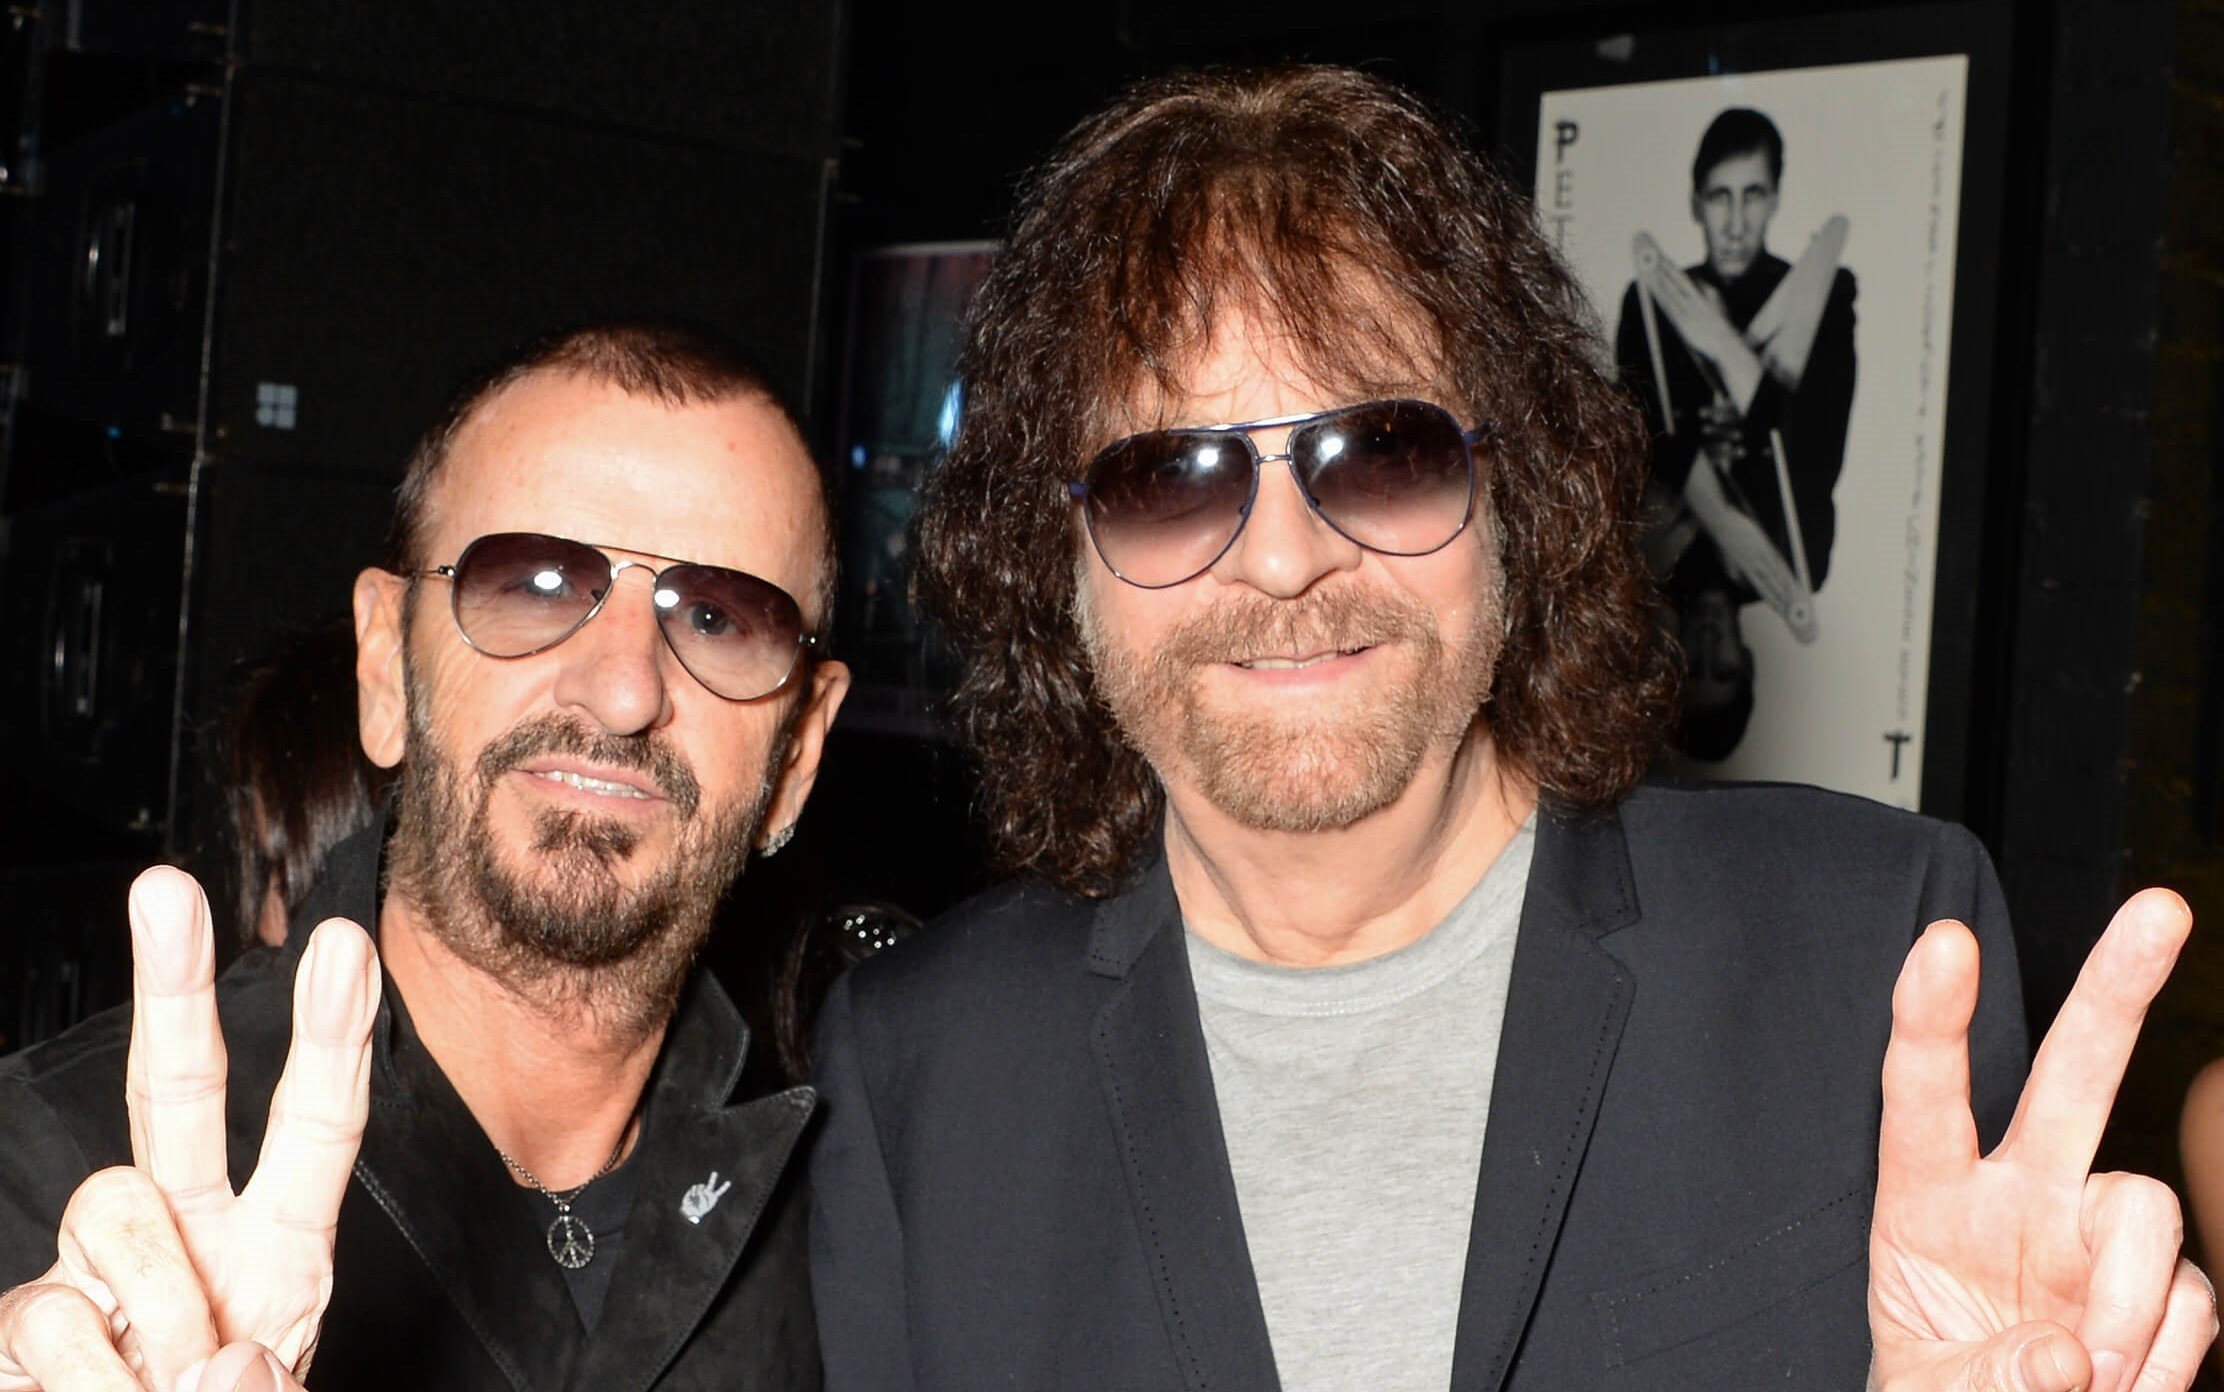 The Beatles' Ringo Starr with Jeff Lynne